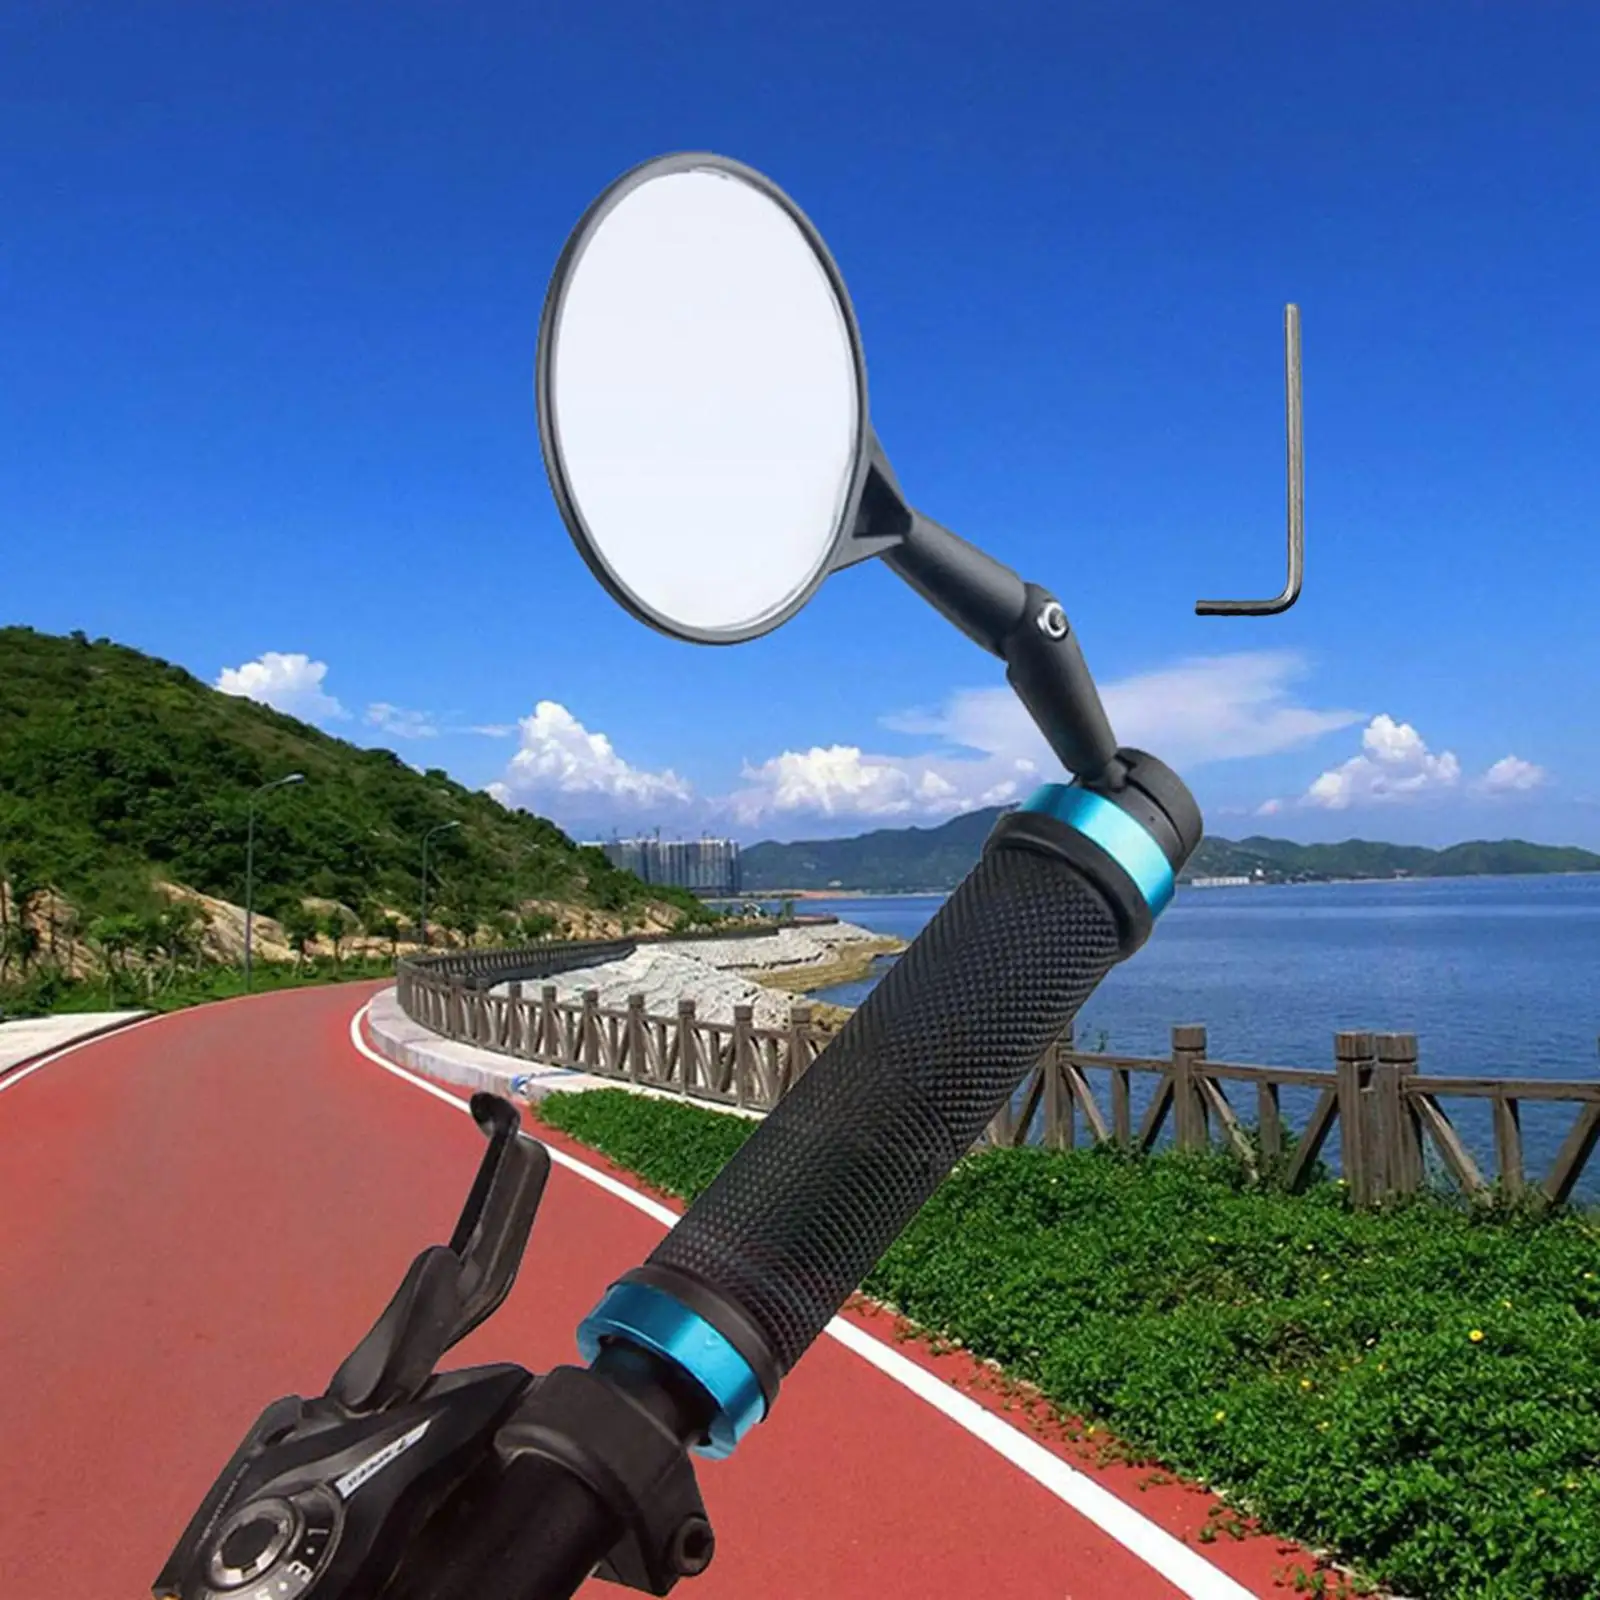 Bicycle Adjustable Rearview Mirror 360 Rotatable MTB Road Bike Safety Tool Handlebar Cycling Rear View Mirrors Accessories